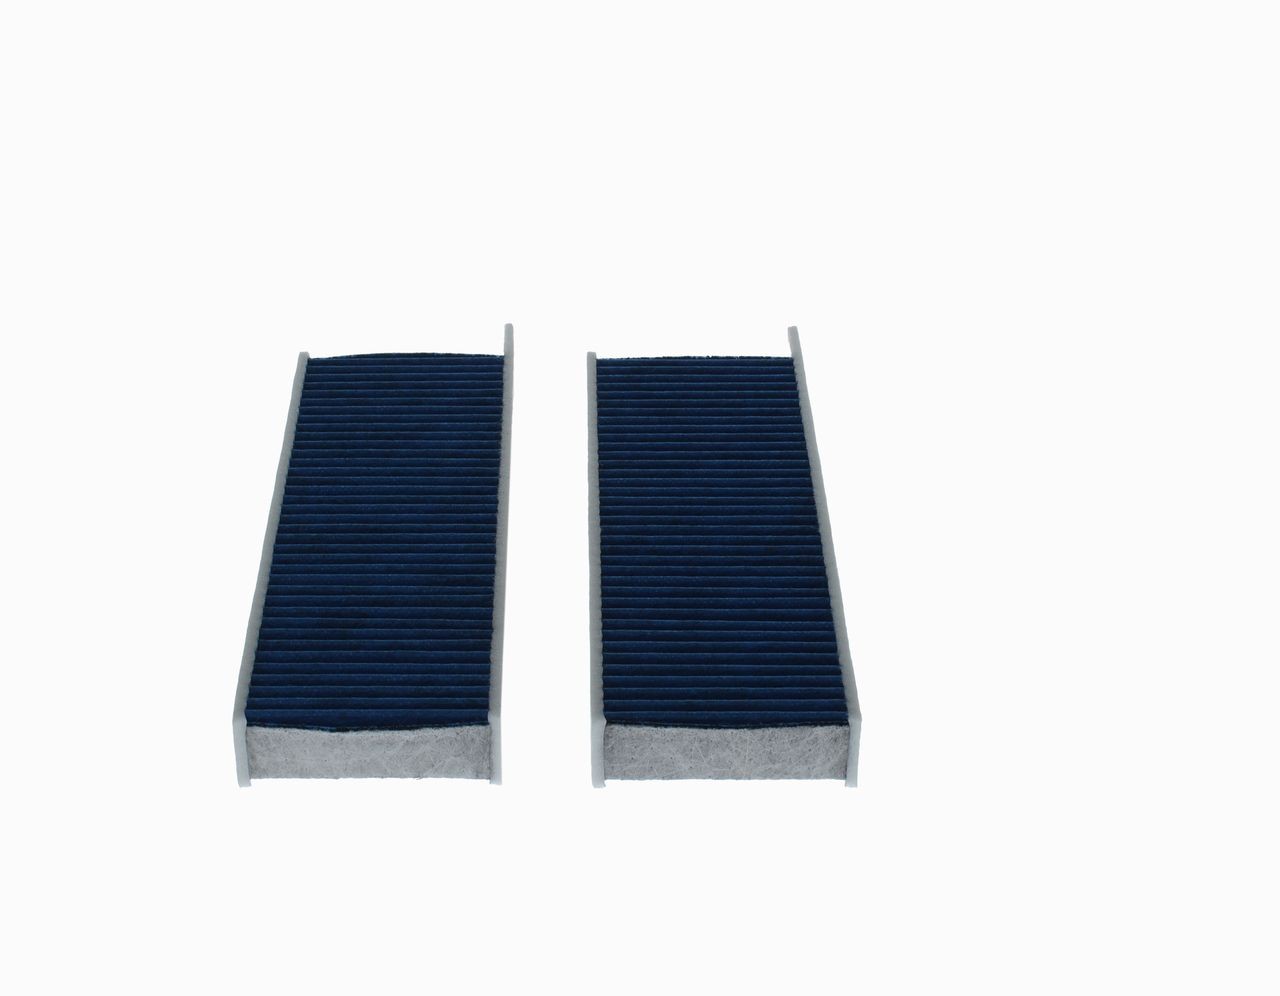 0986628610 Air con filter A 8610 BOSCH Activated Carbon Filter, Particulate filter (PM 2.5), with anti-allergic effect, with fungicidal effect, with antibacterial action, 292 mm x 95 mm x 30 mm